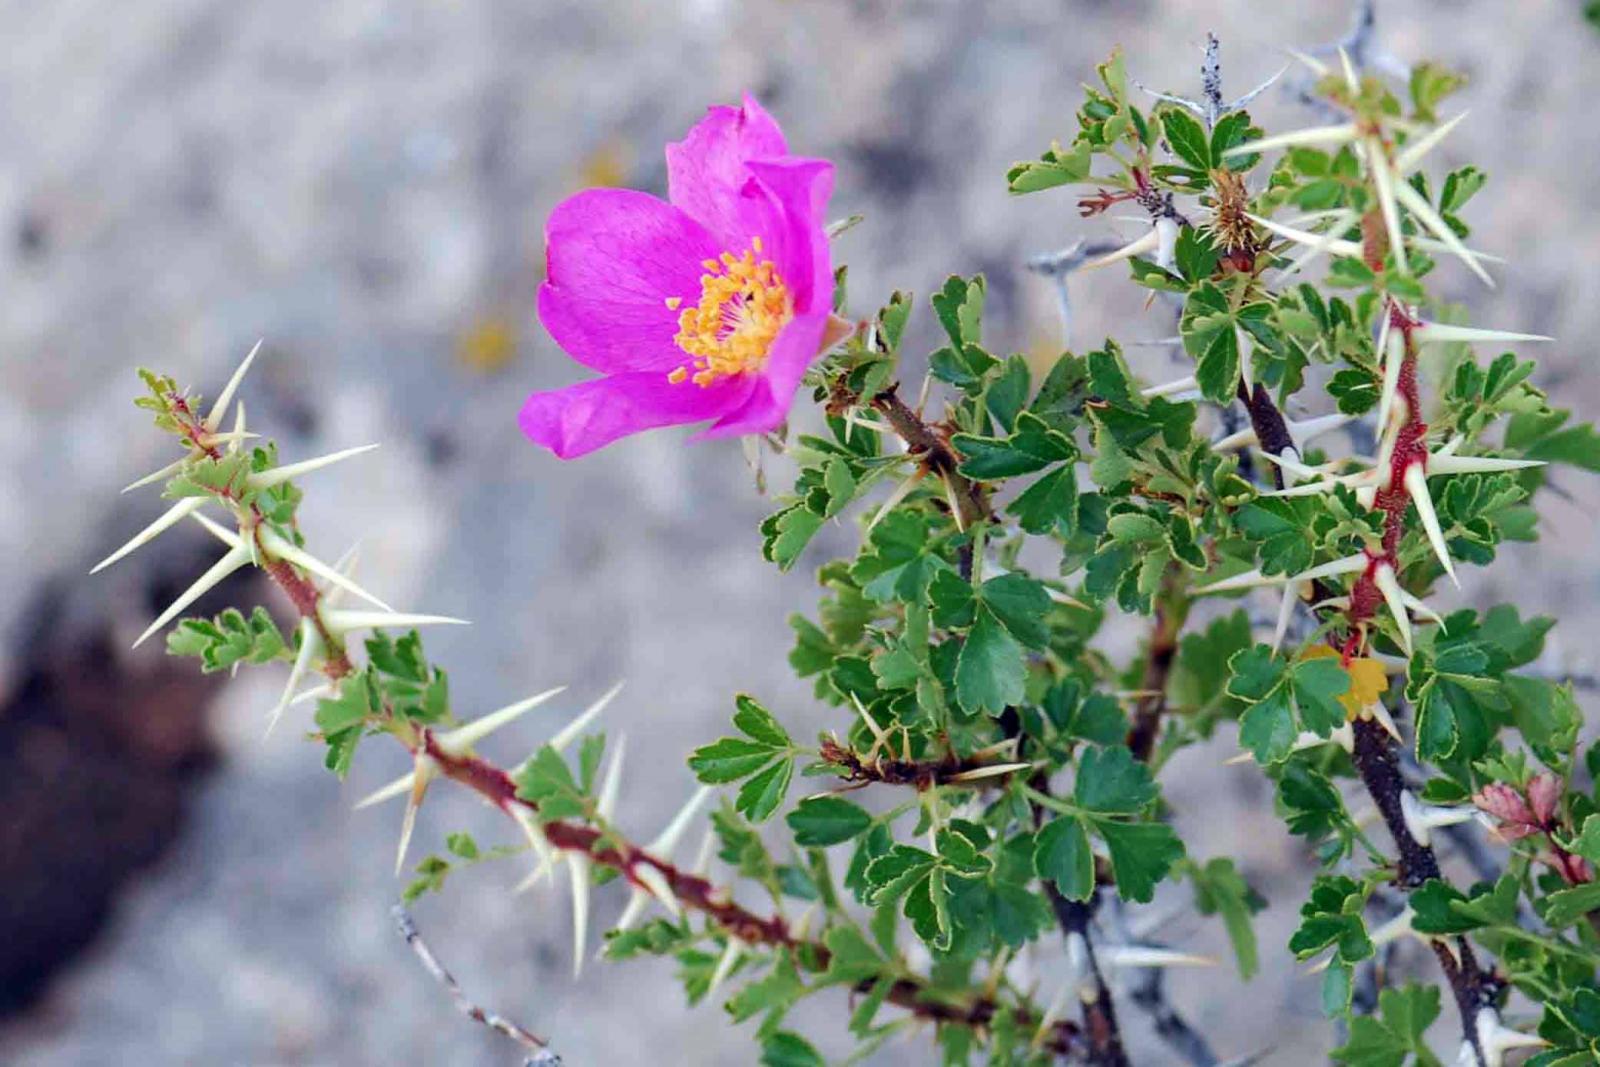 NatureServe ranks the desert rose (Rosa stellata) as "vulnerable" in New Mexico and "imperiled" in Arizona. | Photo by Greg Goodwin for the Southwest Environmental Information Network